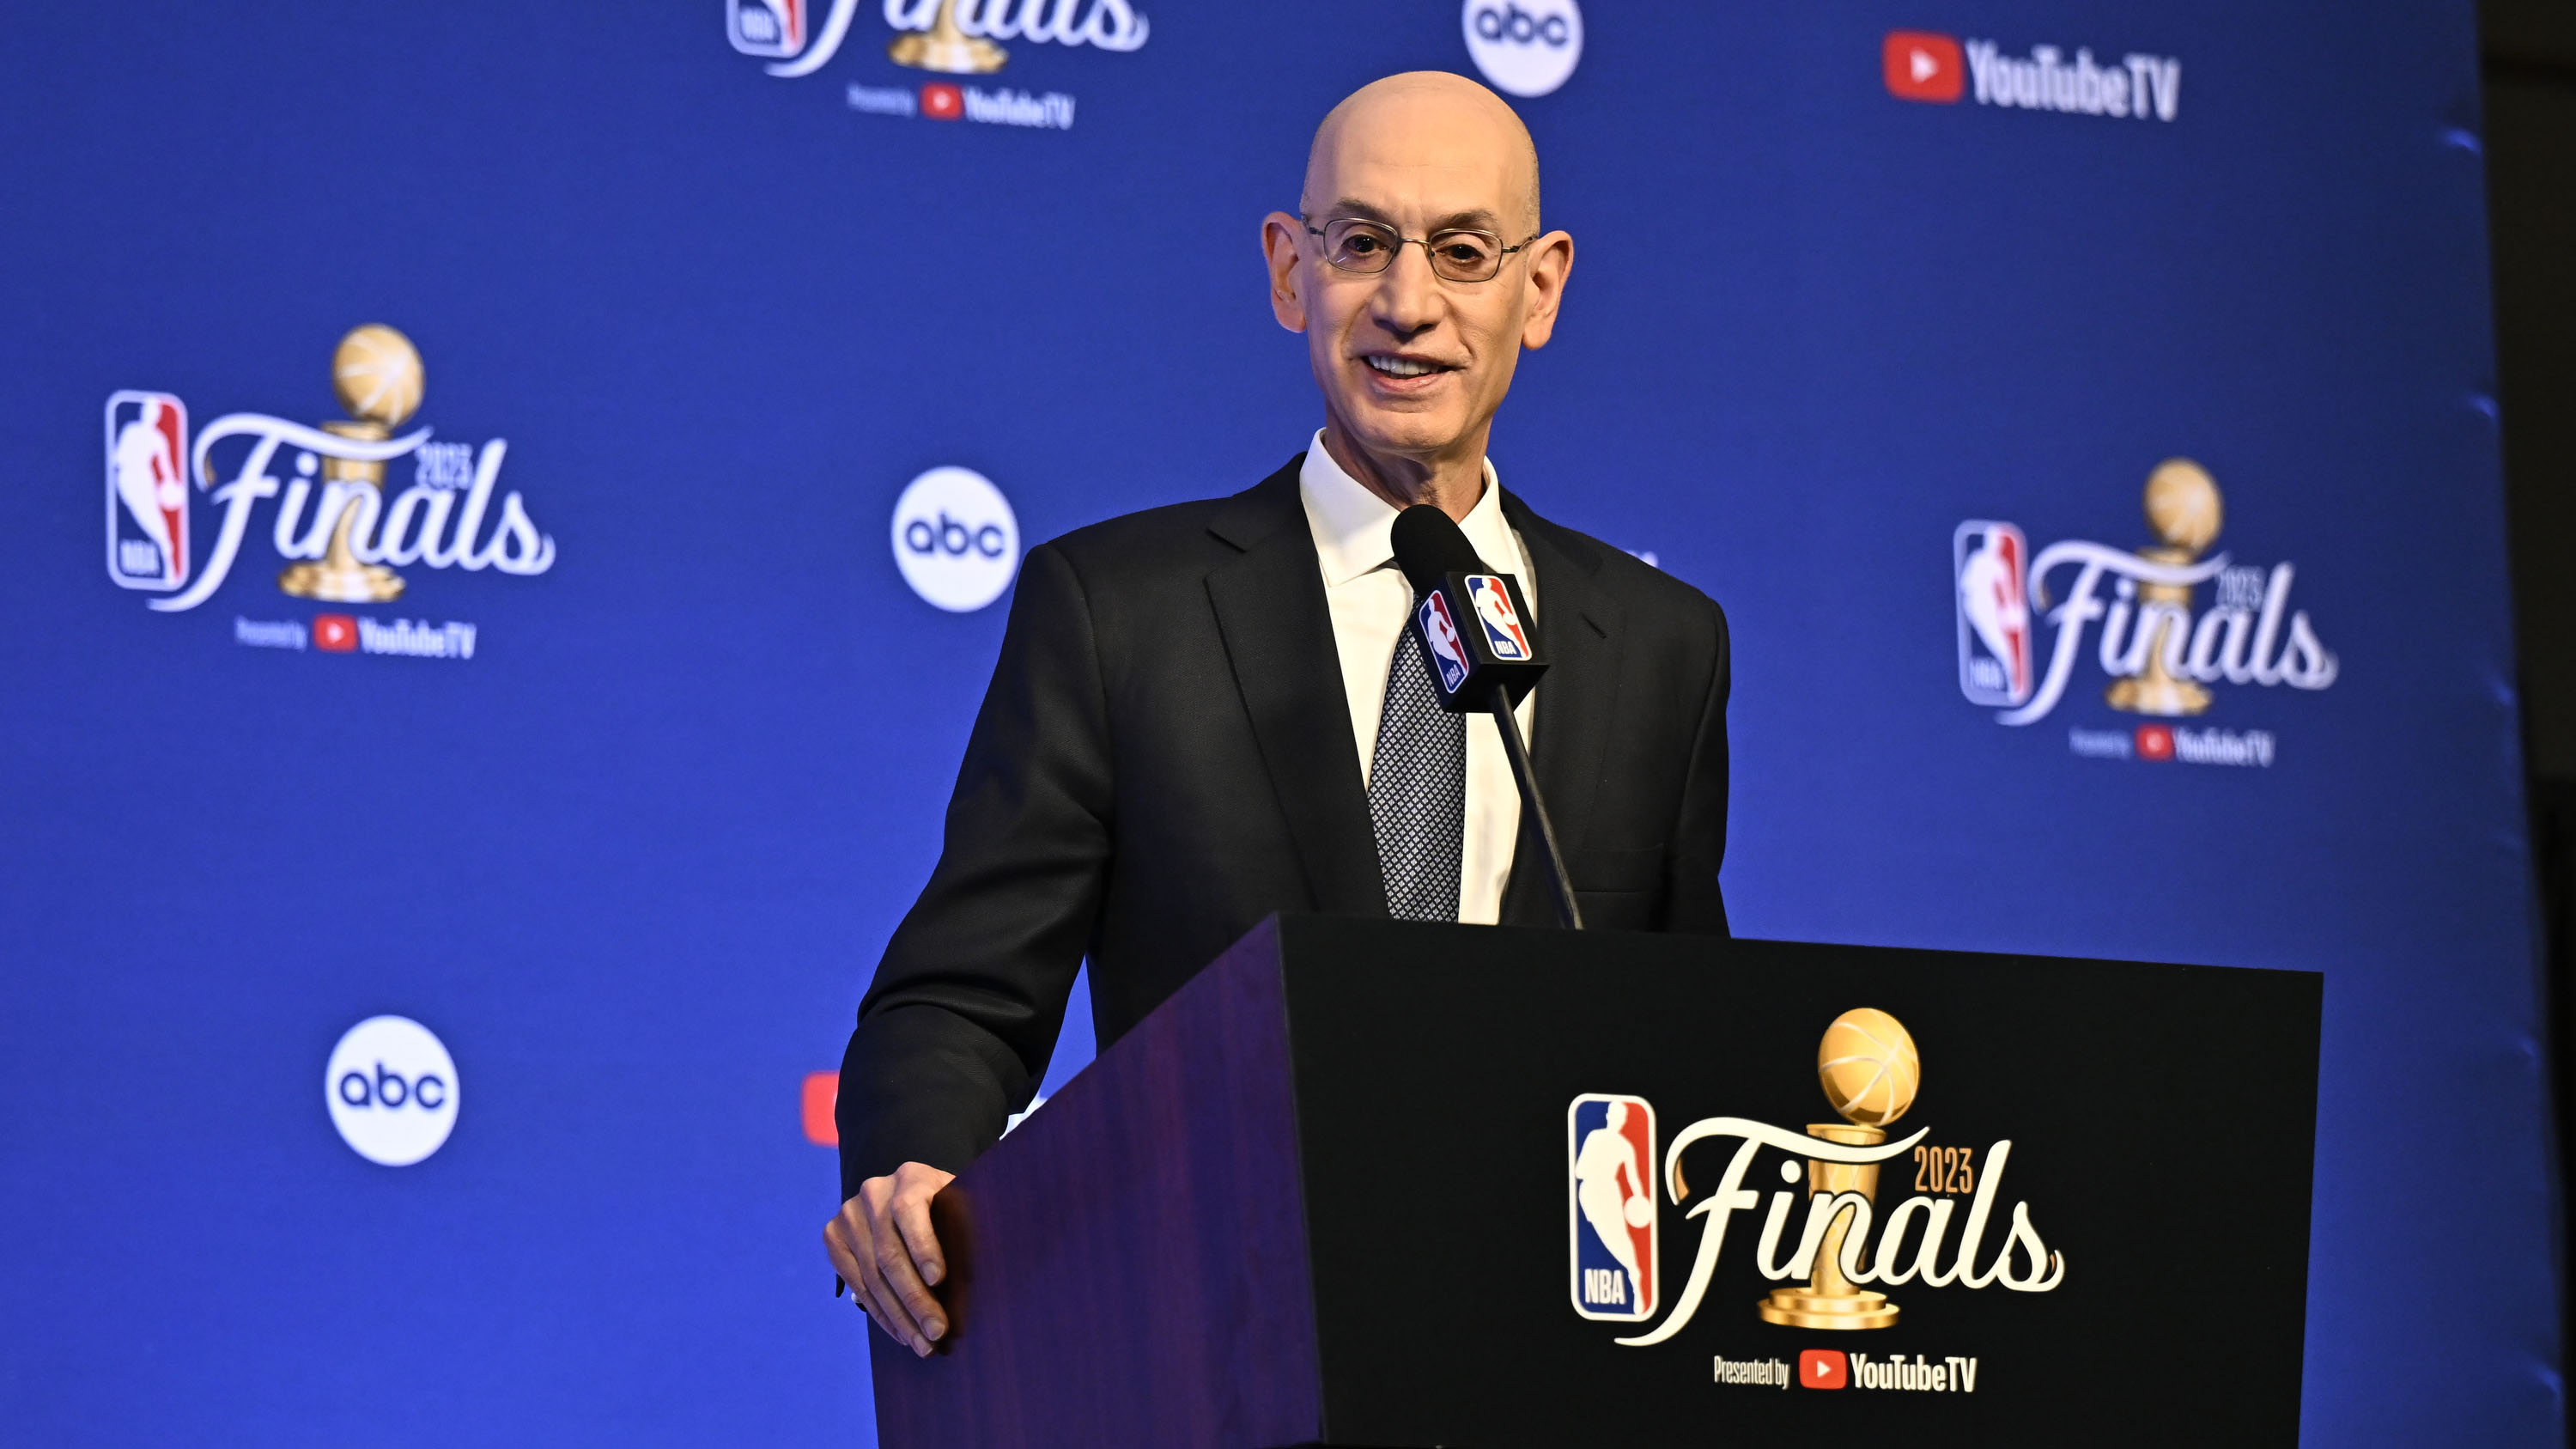 NBA unveils new media rights deal for 2025: NBC, Amazon join ESPN as broadcasters